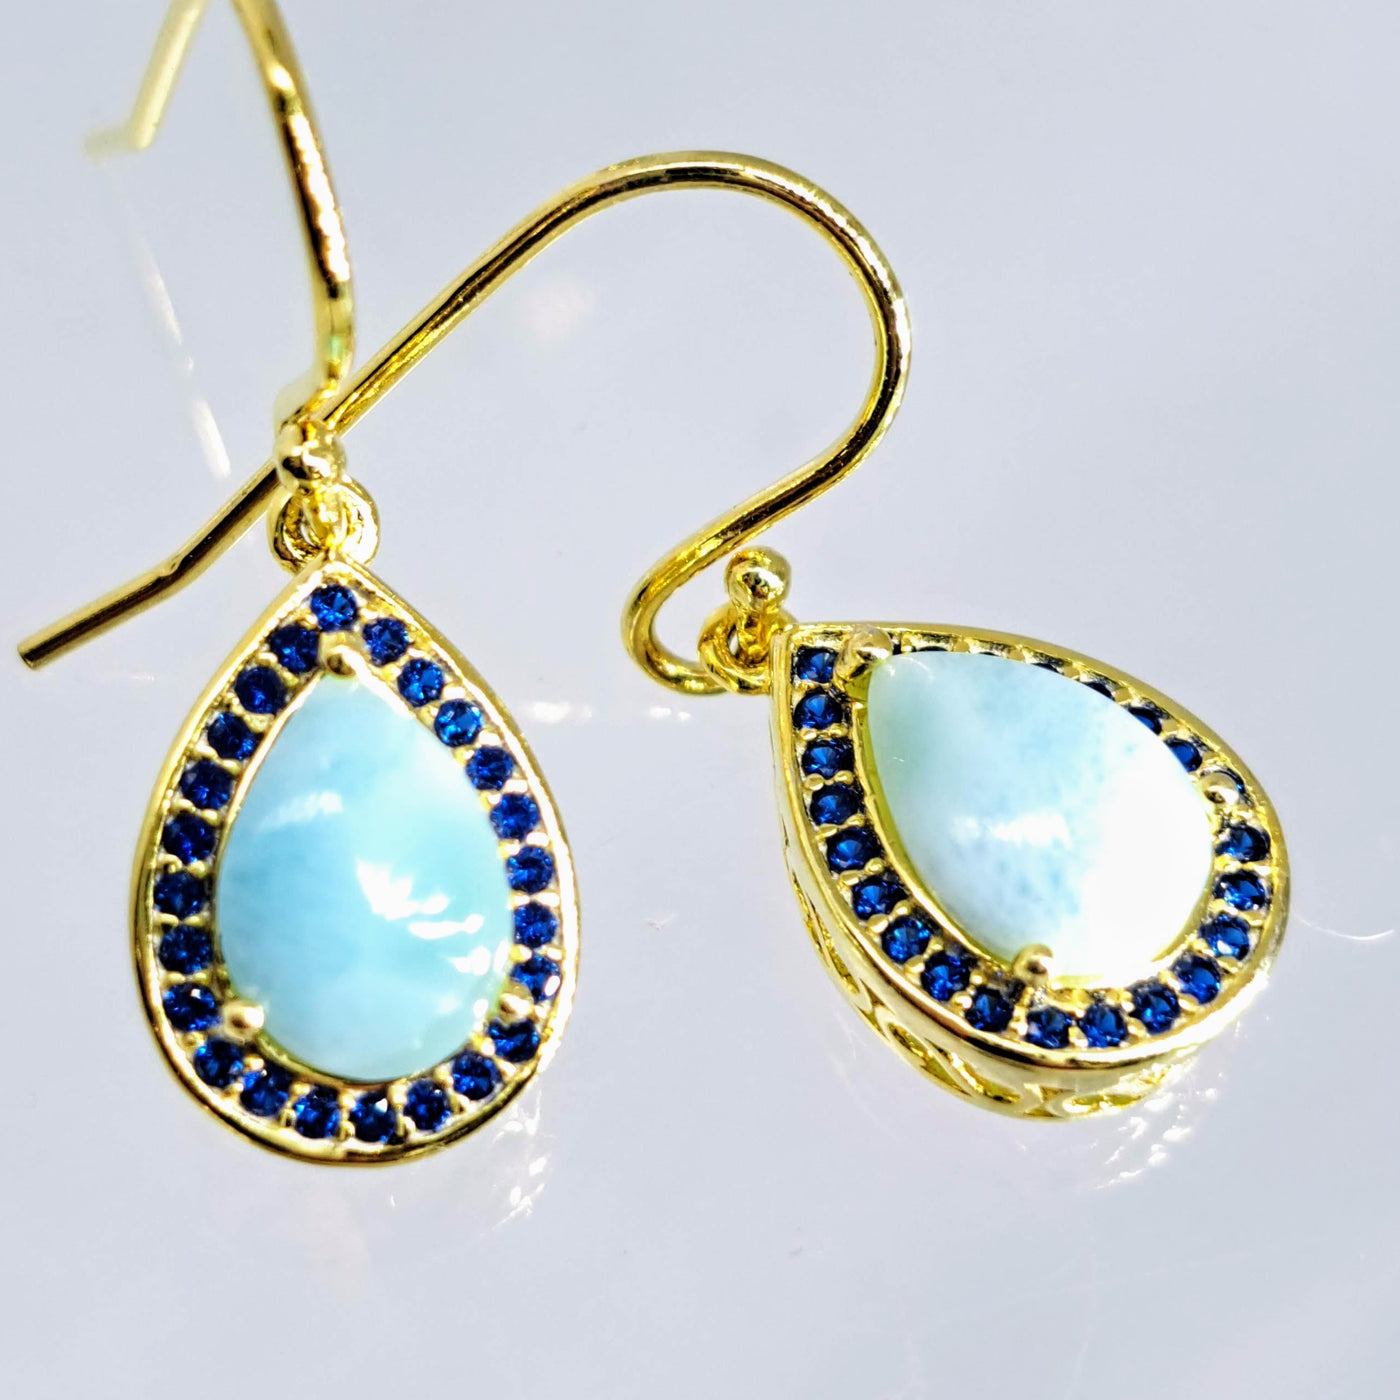 "Key West Vacation" 1" Earrings - Larimar, Sapphire, Gold Sterling